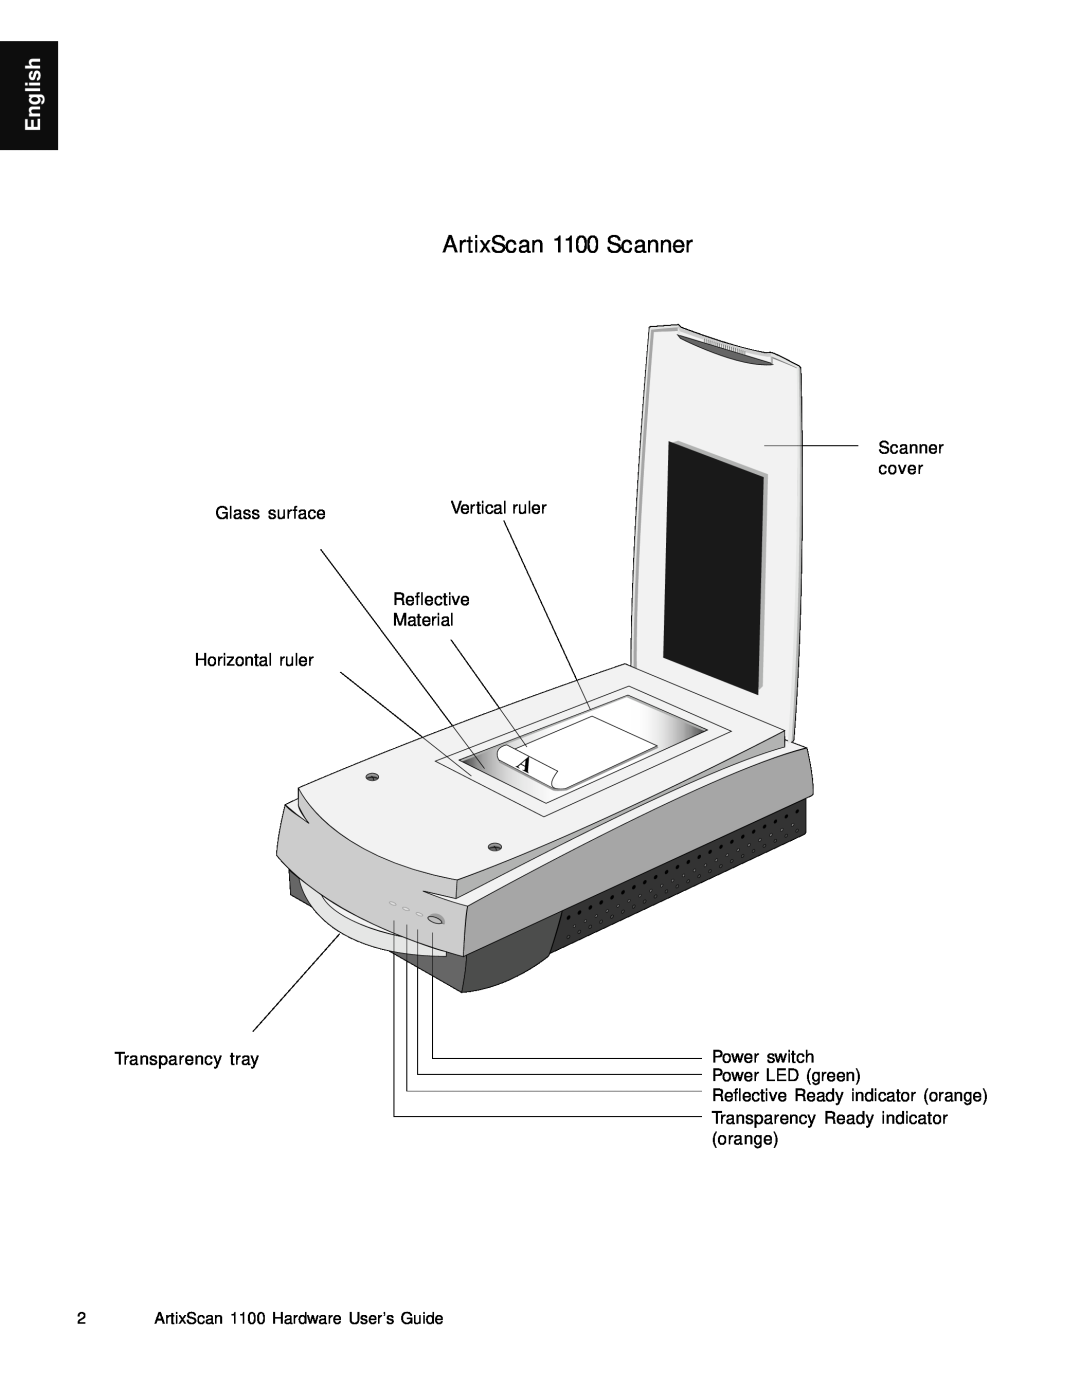 Microtek Artix Scan1100 ArtixScan 1100 Scanner, English, Scanner cover, Glass surface, Transparency tray, Power switch 